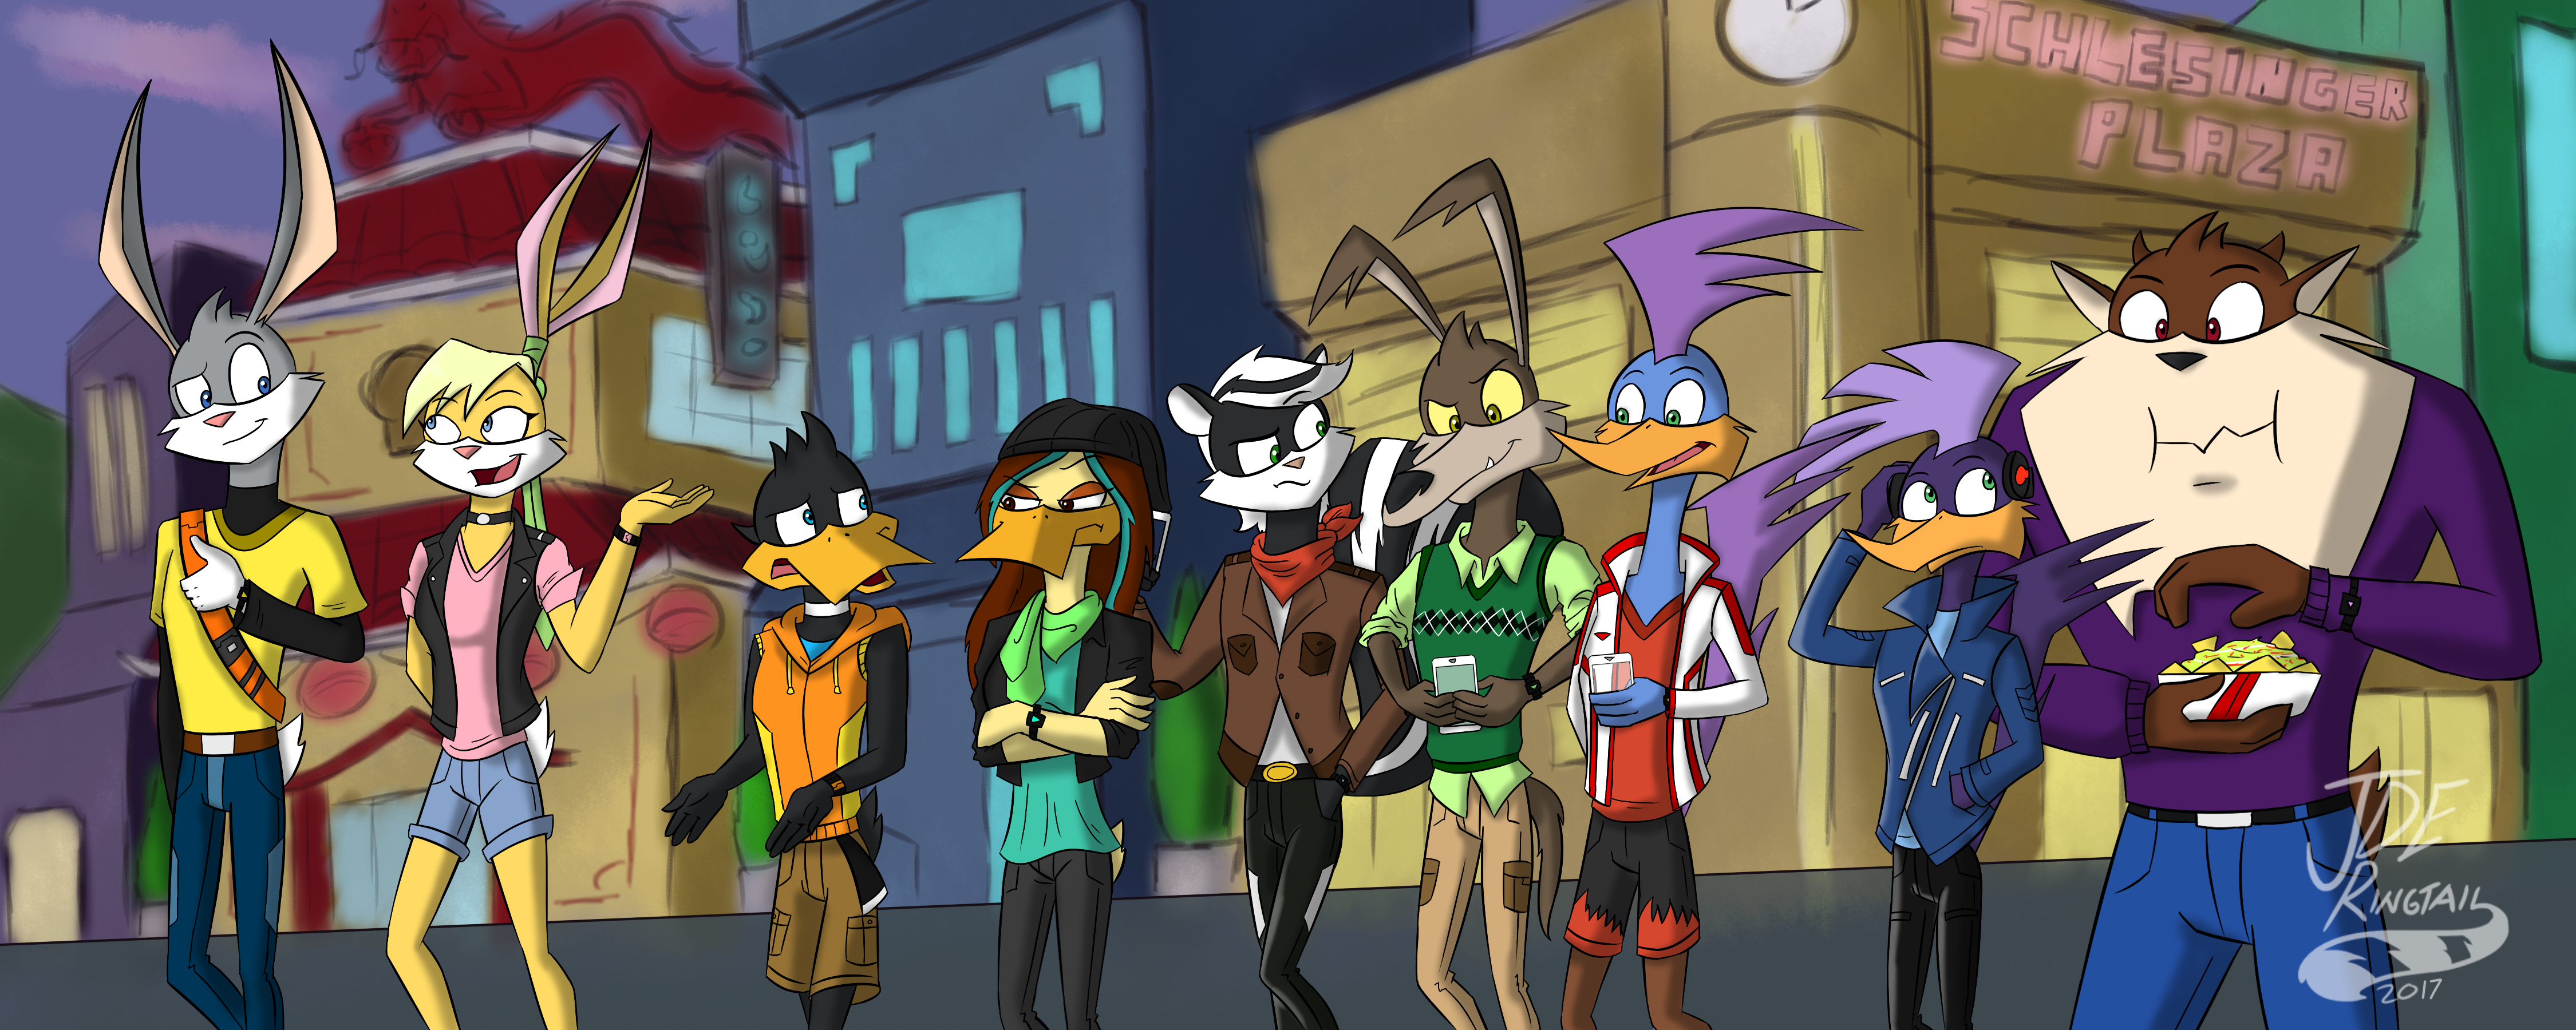 Fastest Loonatics Unleashed Characters.